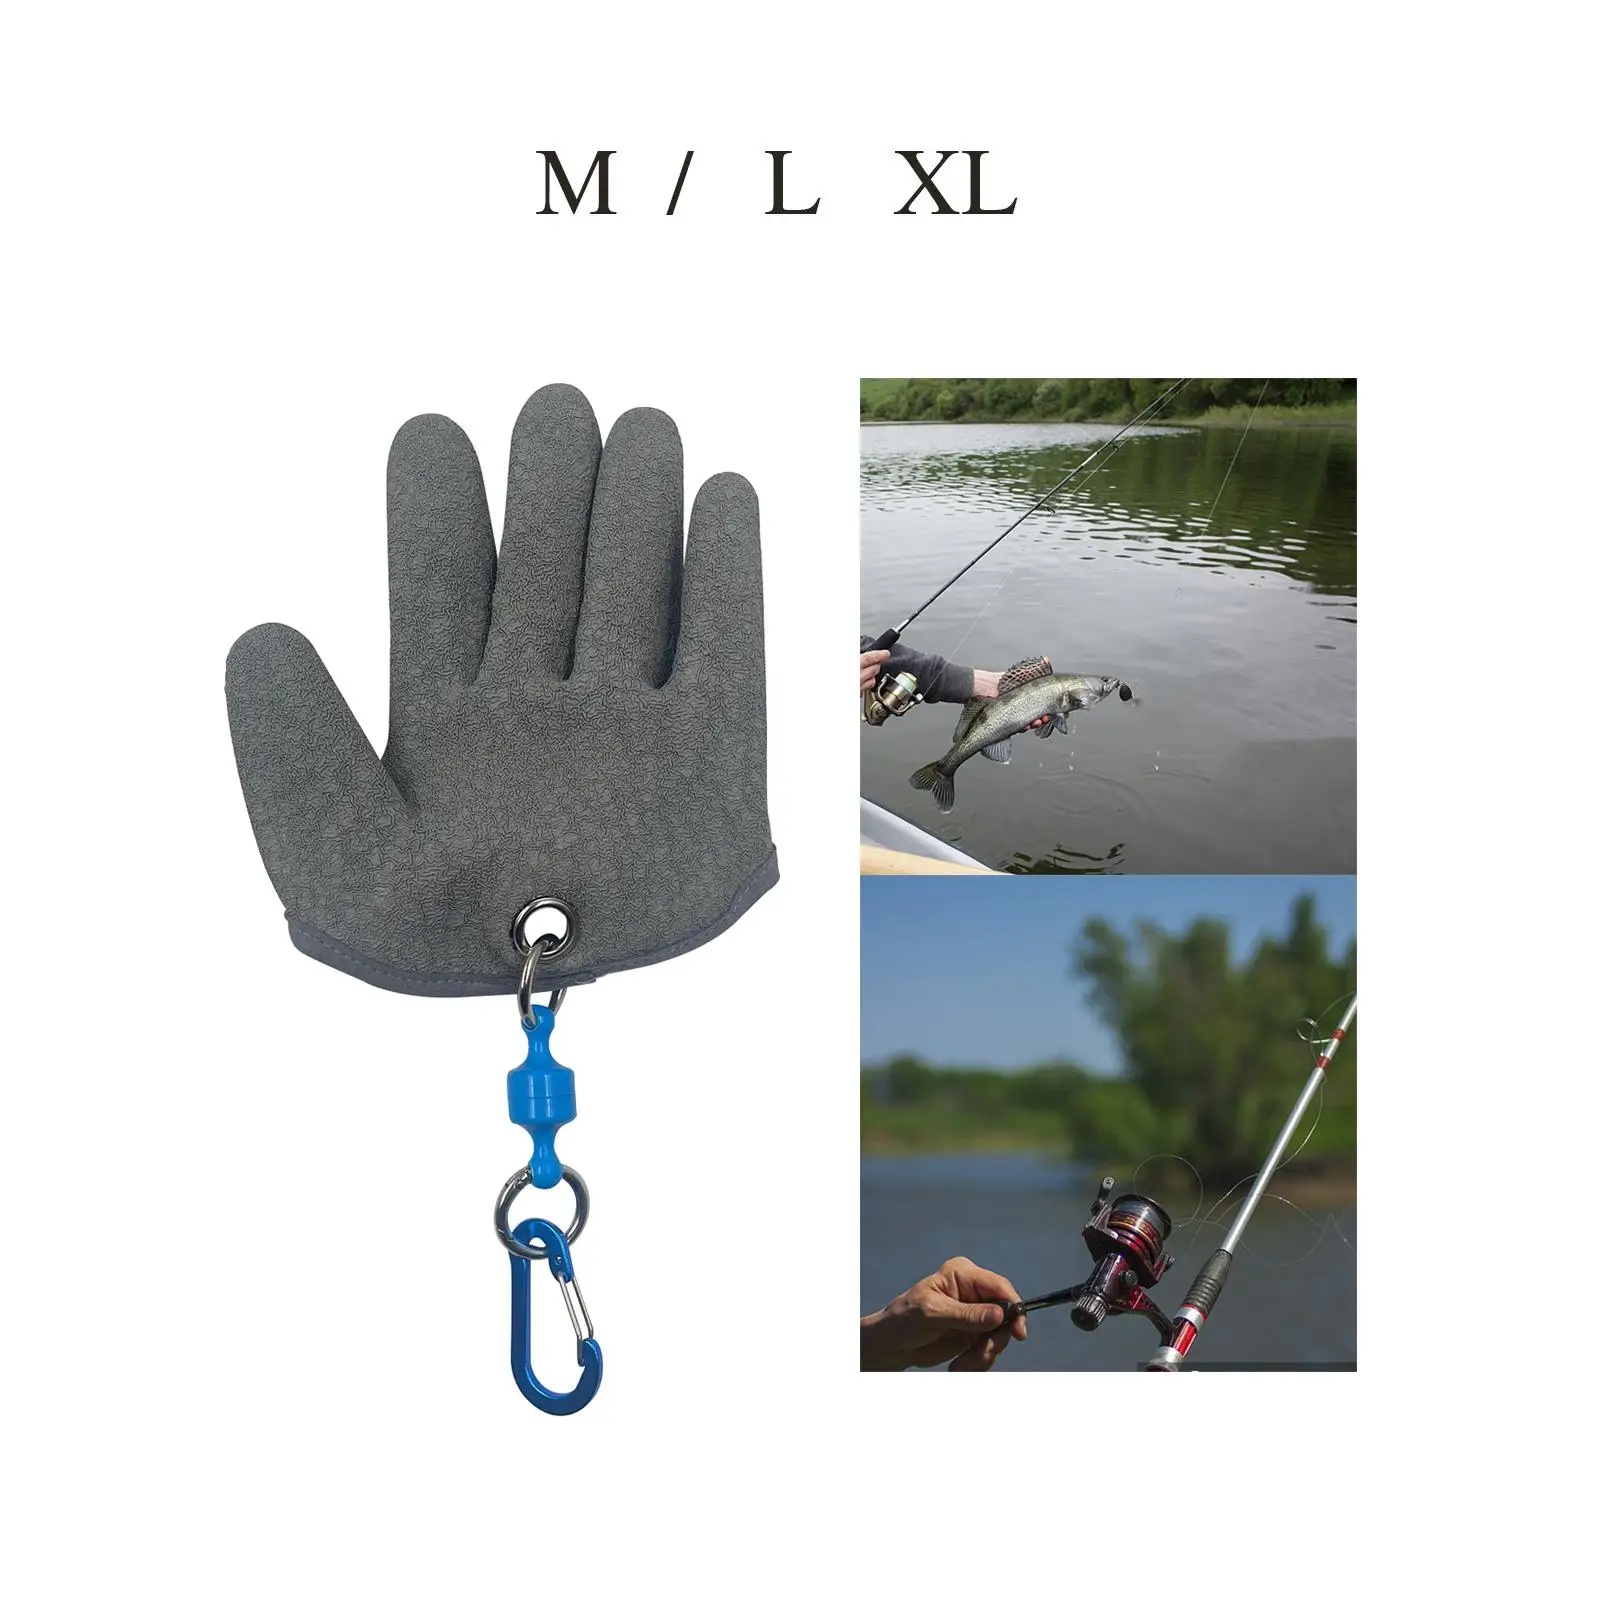 Left Hand Fish Glove Puncture Resistant Fishing Glove Cut Resistant Hands Protector for Outdoor Activities Cleaning Catch Fish